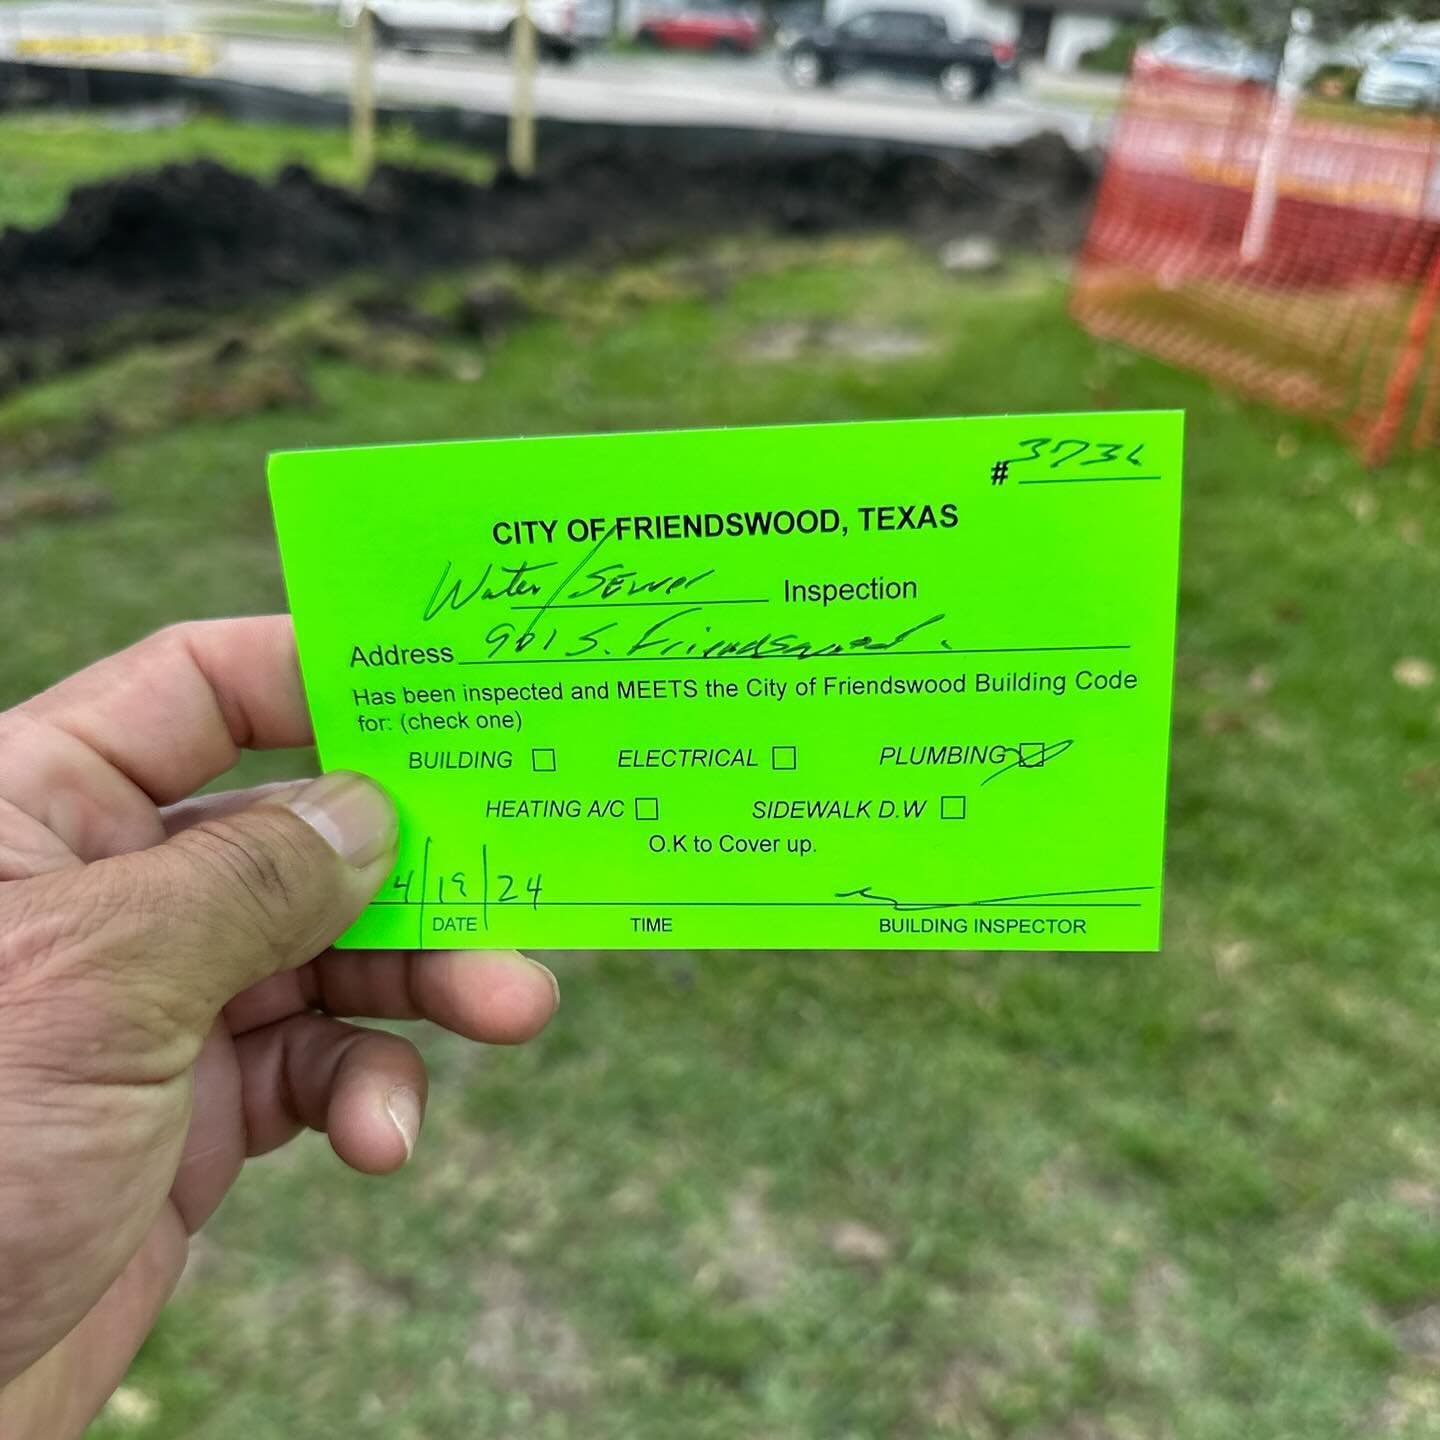 I love green stickers 💚

Water and sewer connections ✅

#friendswood #friendswoodmomsanddads #friendswoodtx #friendswoodscoopshop